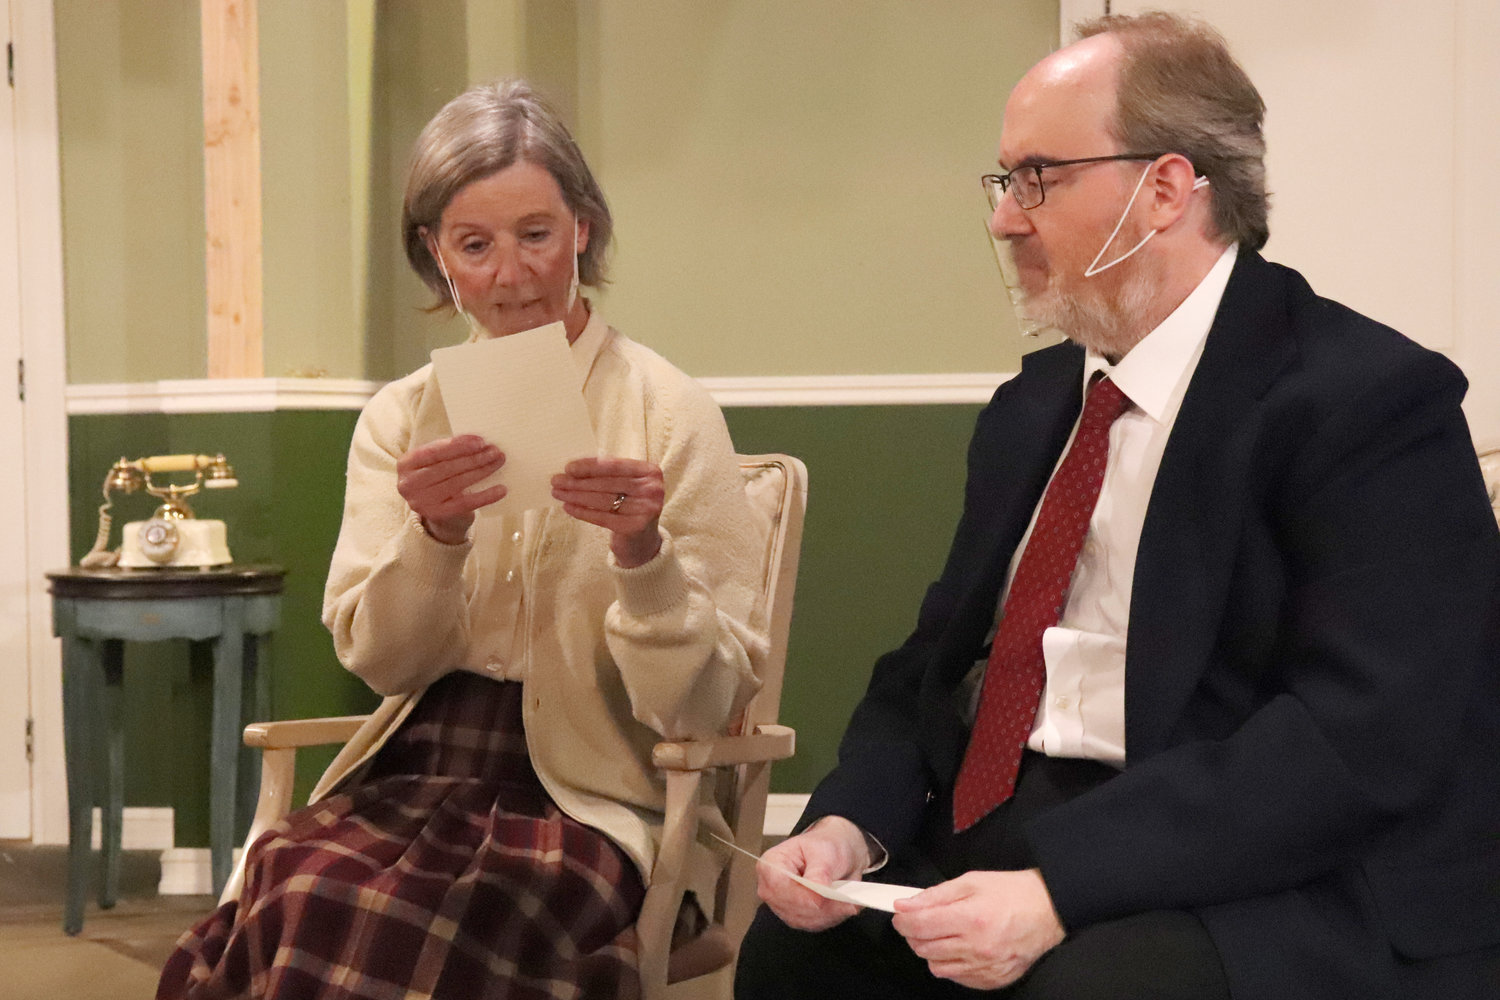 Susan Robb as Miss Marple and George Dougherty as Inspector Craddock perform on stage during a rehearsal of “A Murder is Announced” at Evergreen Playhouse last week.